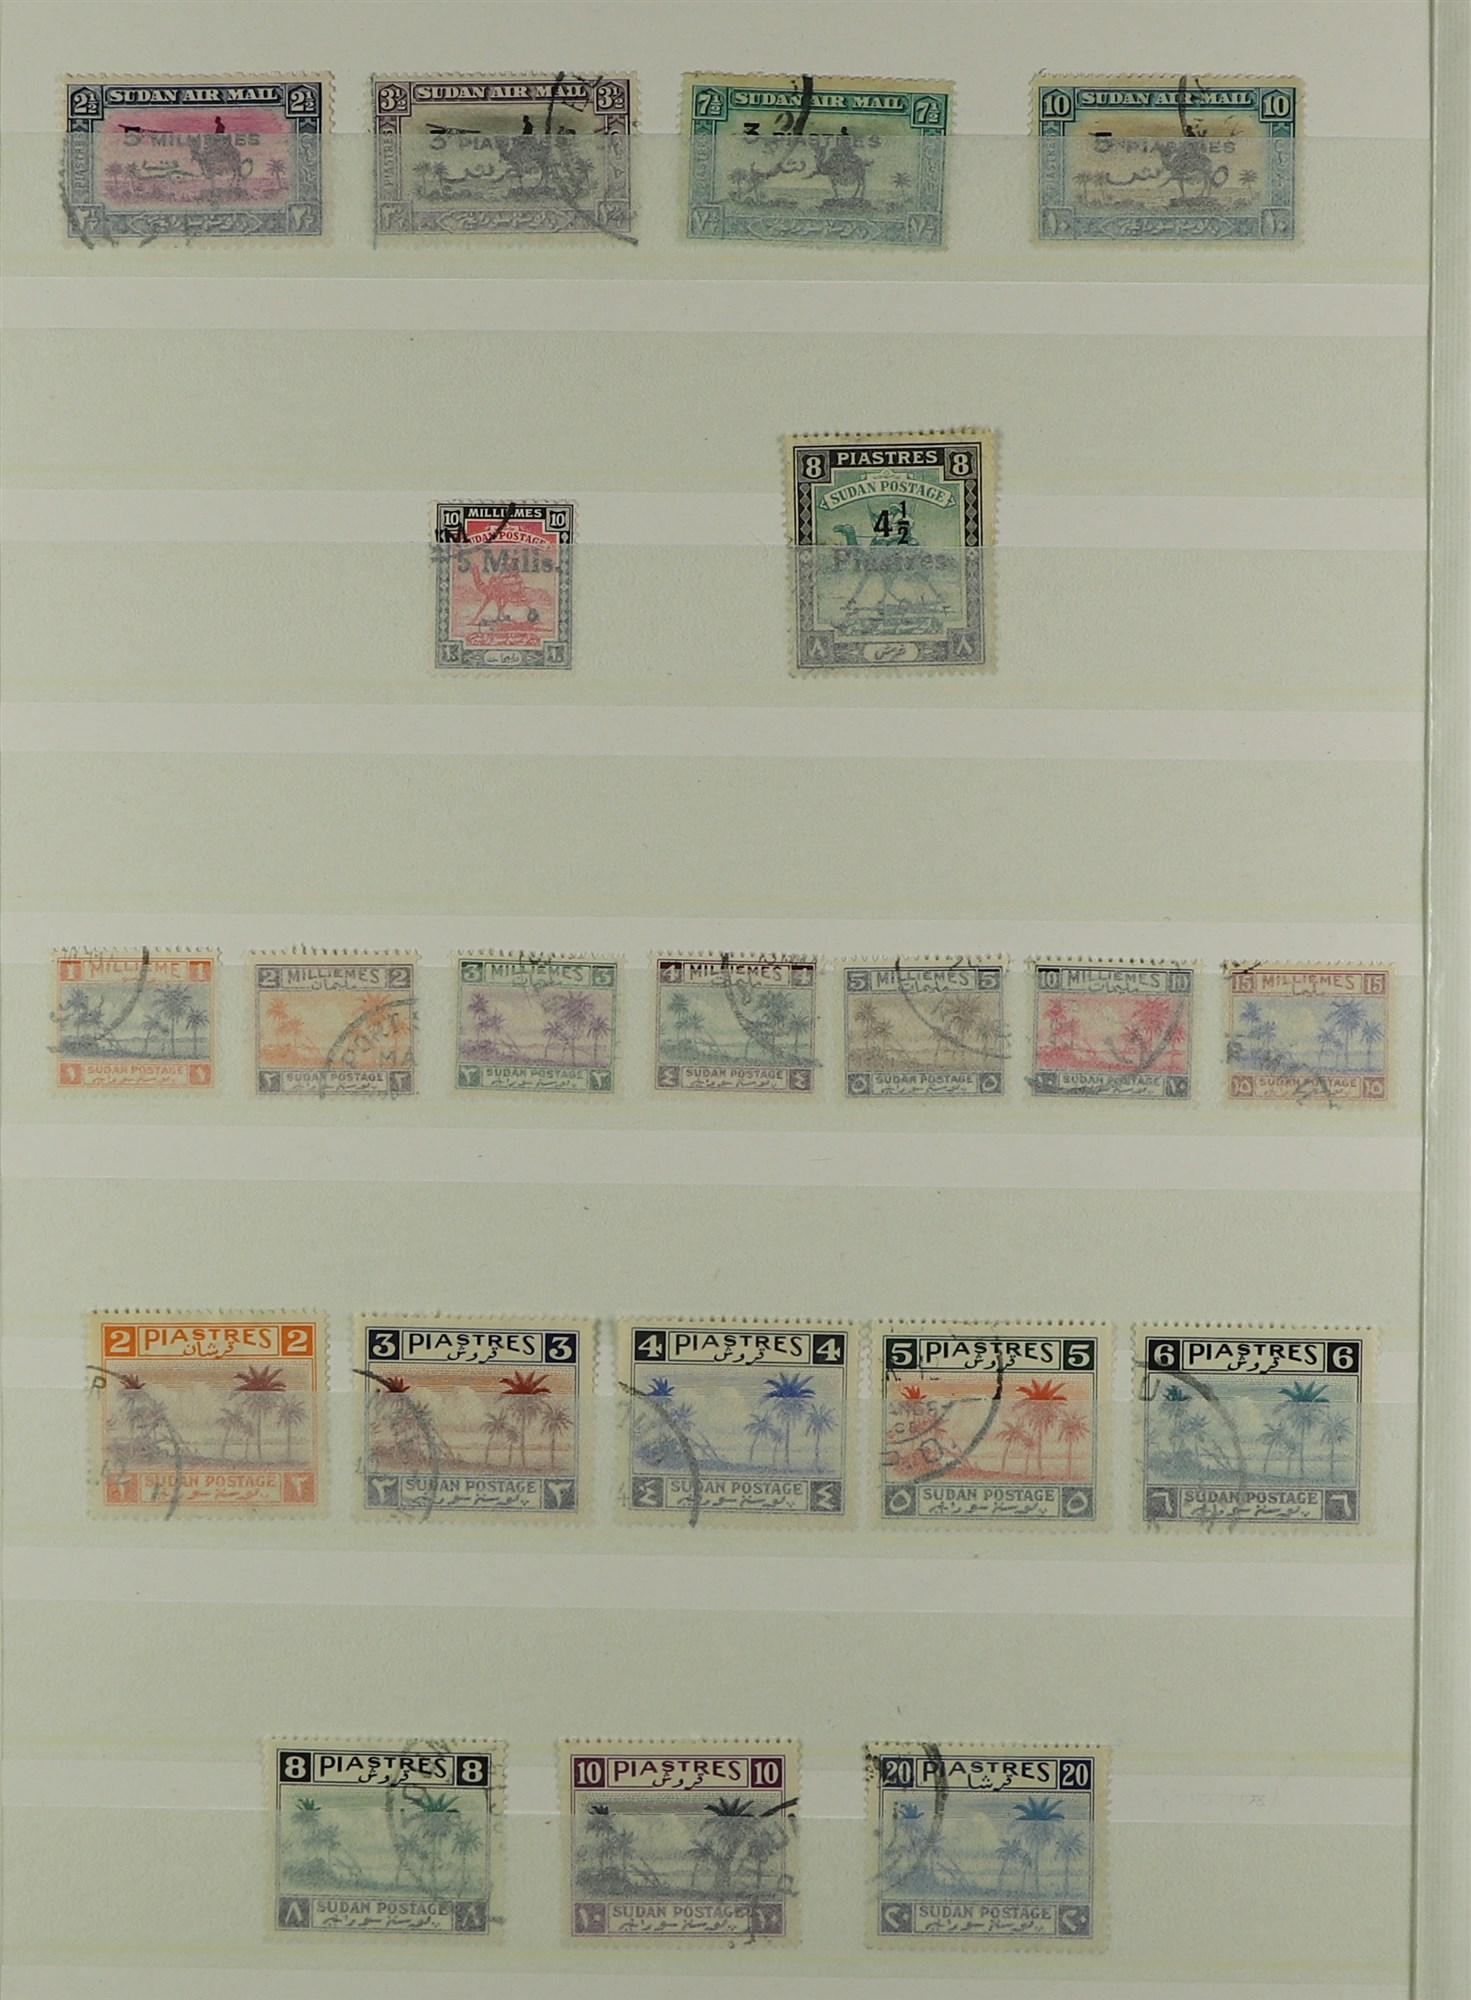 SUDAN 1897 - 1961 USED COLLECTION of 220+ stamps on protective pages, 1897 set to 5pi, 1898 set, - Image 4 of 10